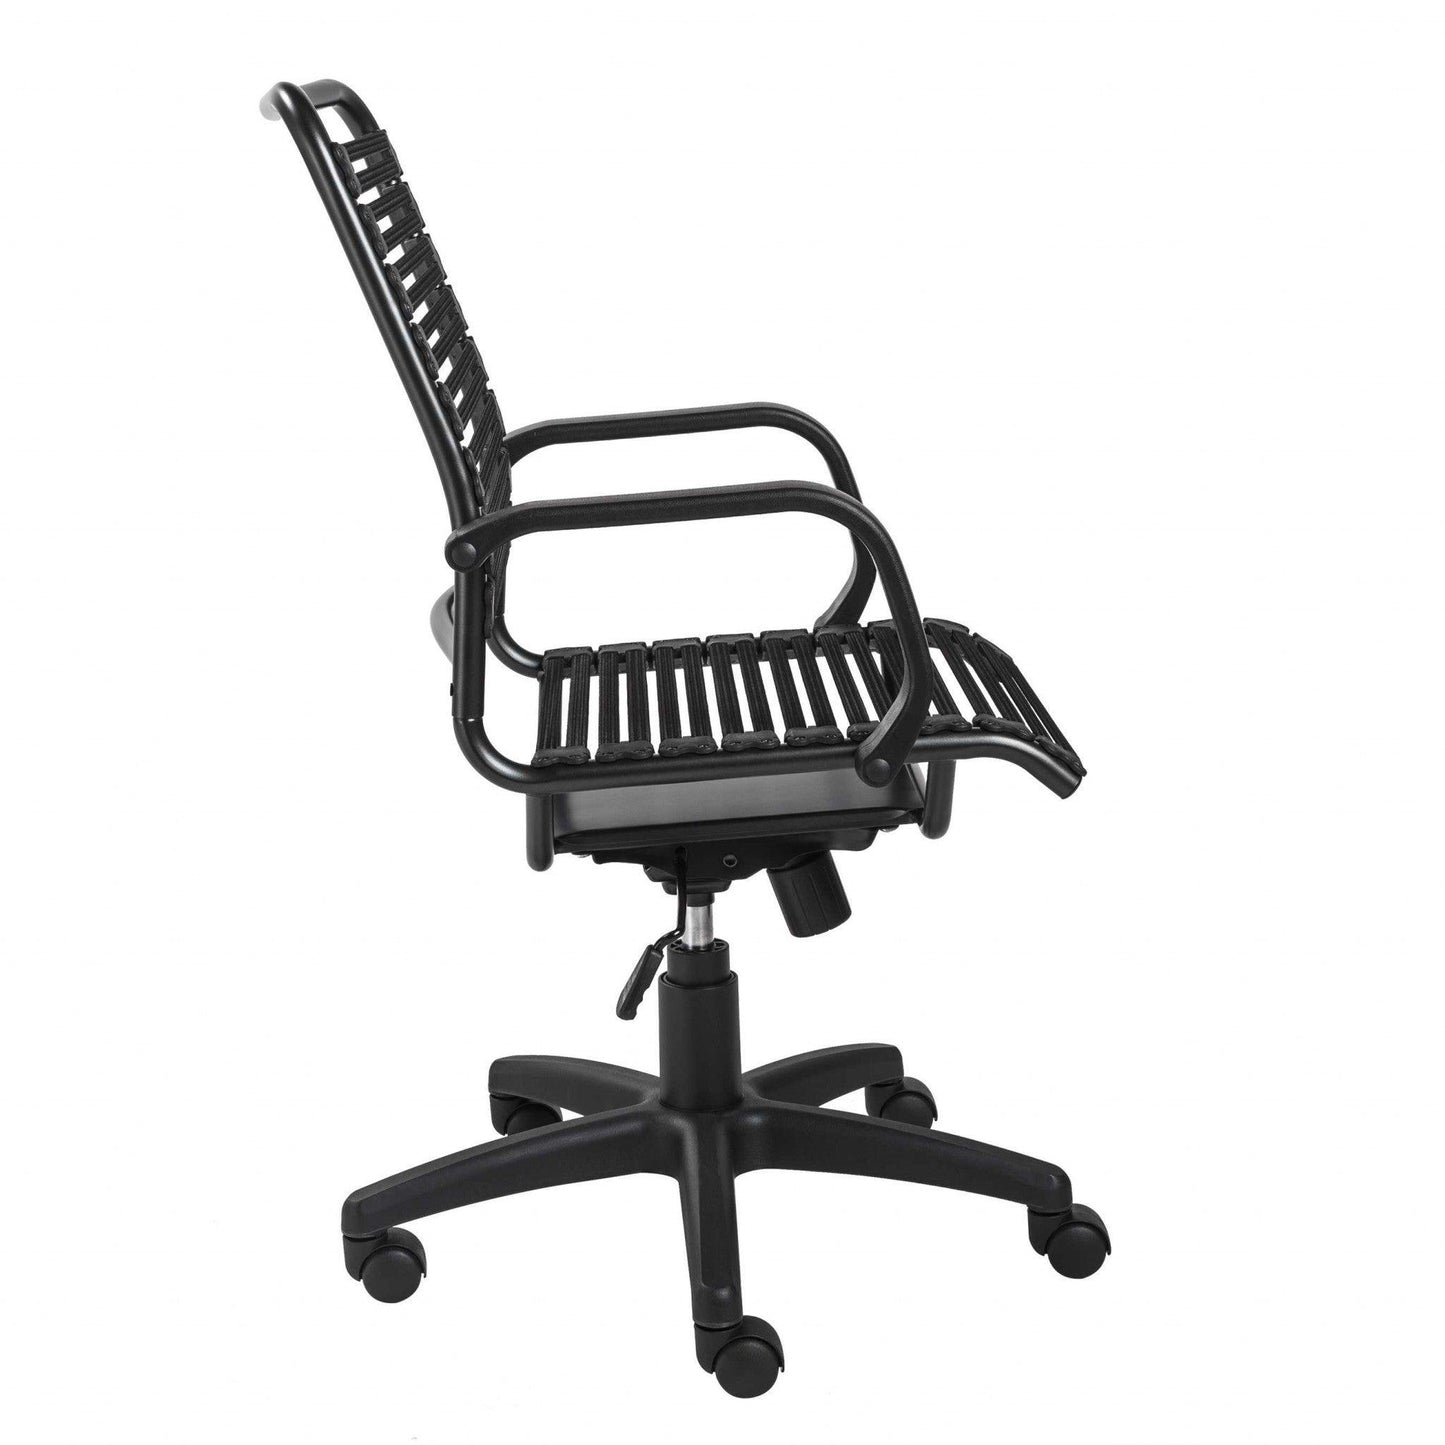 23.04" X 25.6" X 41.74" Black Flat Bungie Cords High Back Office Chair with Graphite Black Frame and Base - AFS